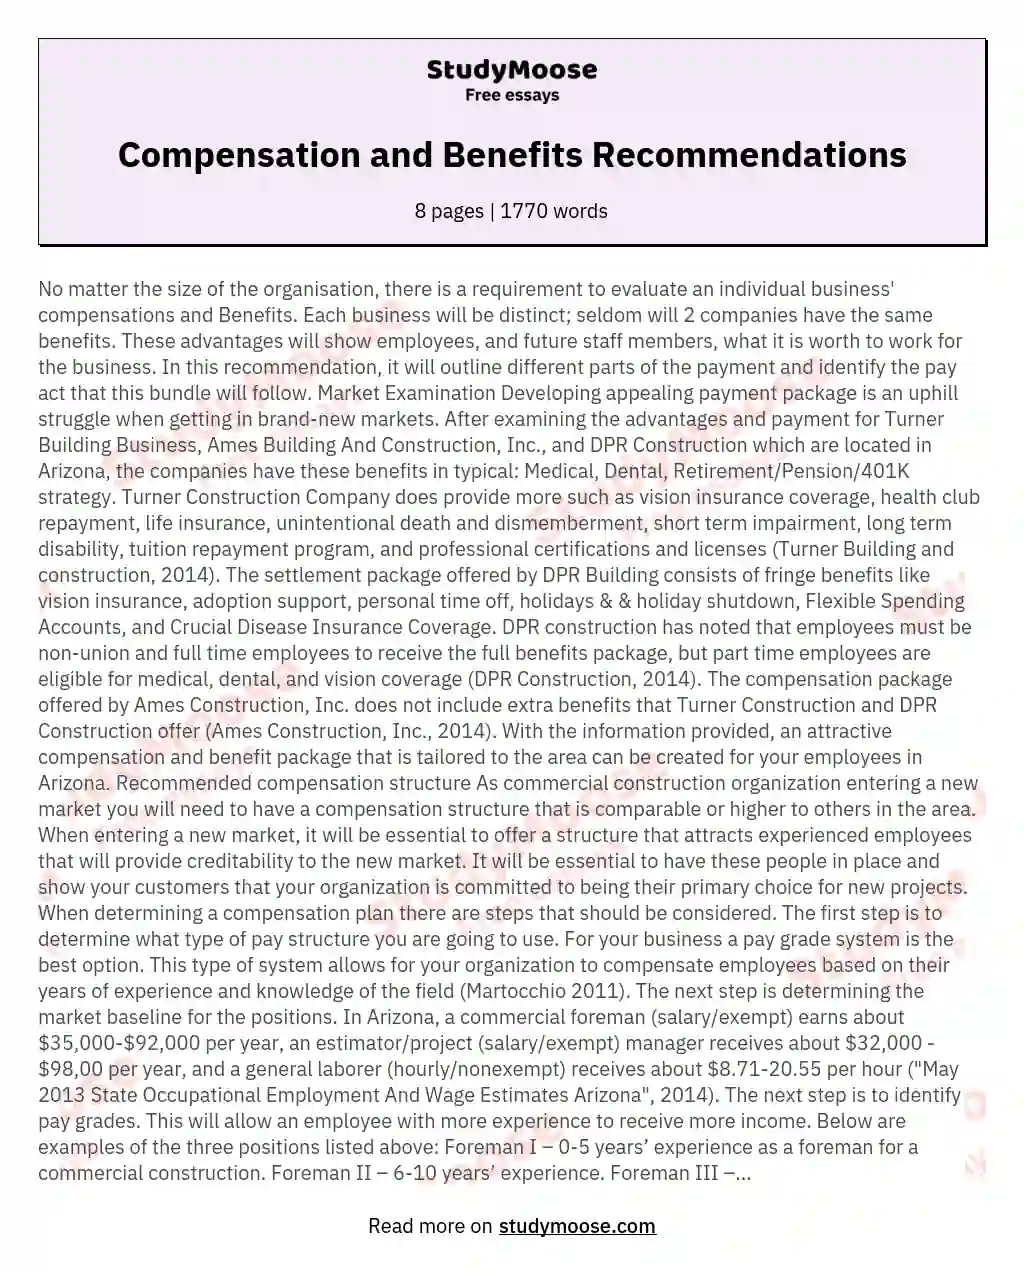 Compensation and Benefits Recommendations